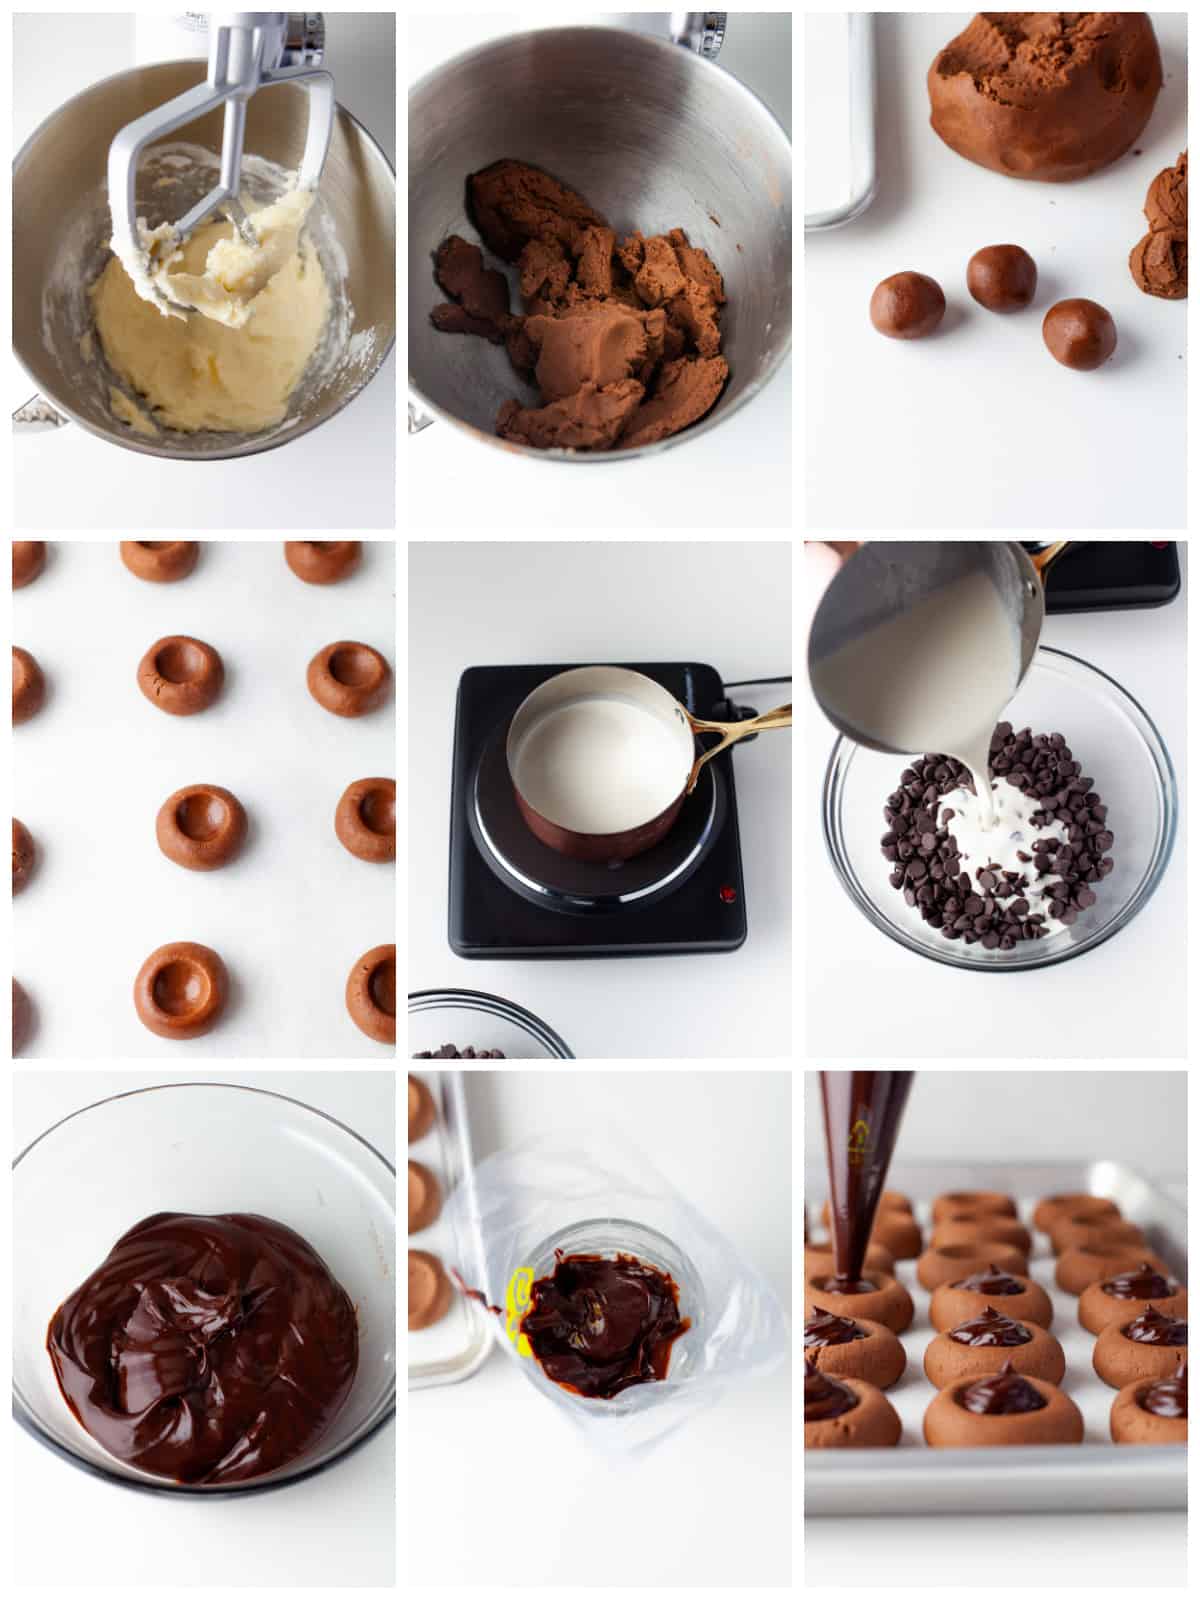 Step by step photos on how to make Chocolate Thumbprint Cookies.